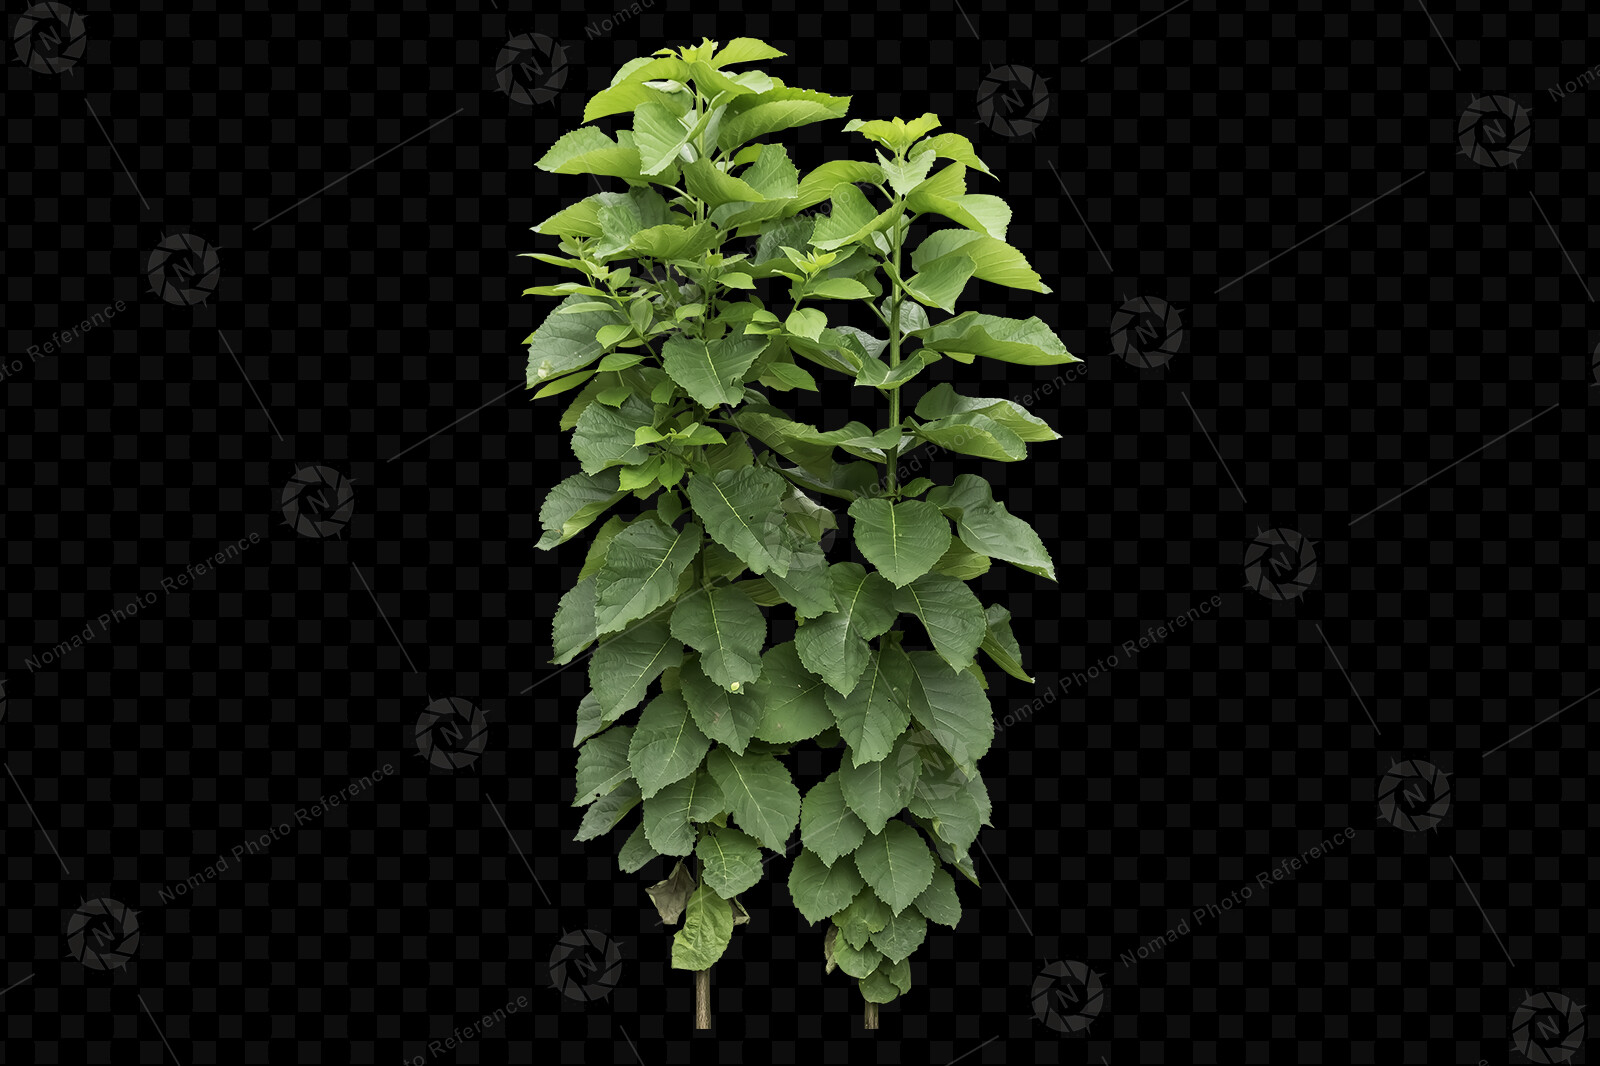 From the PNG Photo Pack: Foliage volume 2

https://www.artstation.com/a/16650698